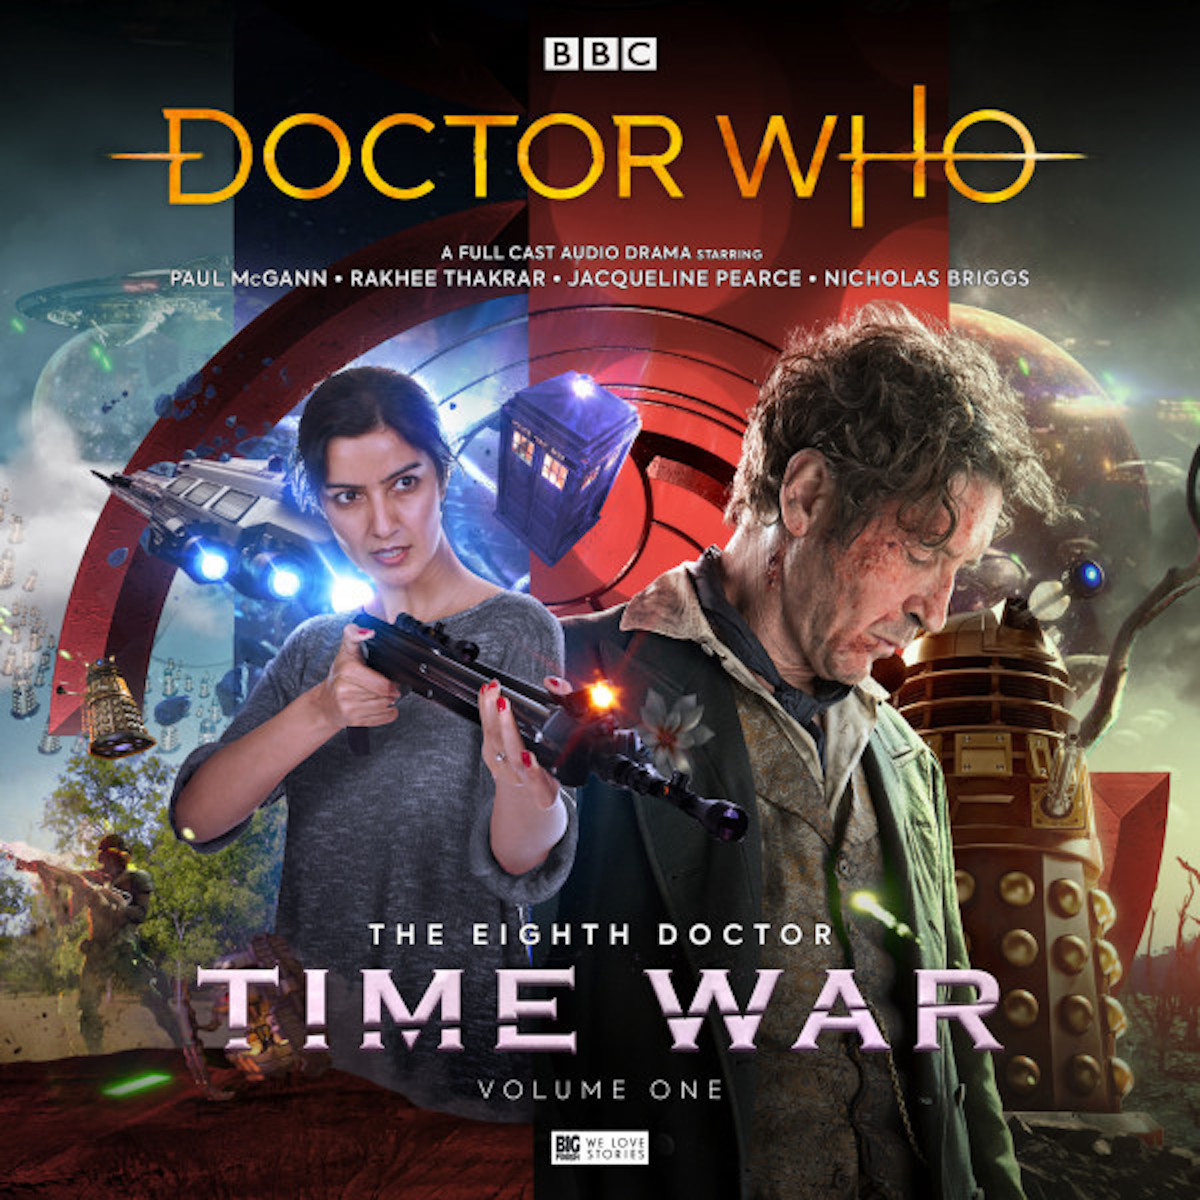 The Time War Volume 1